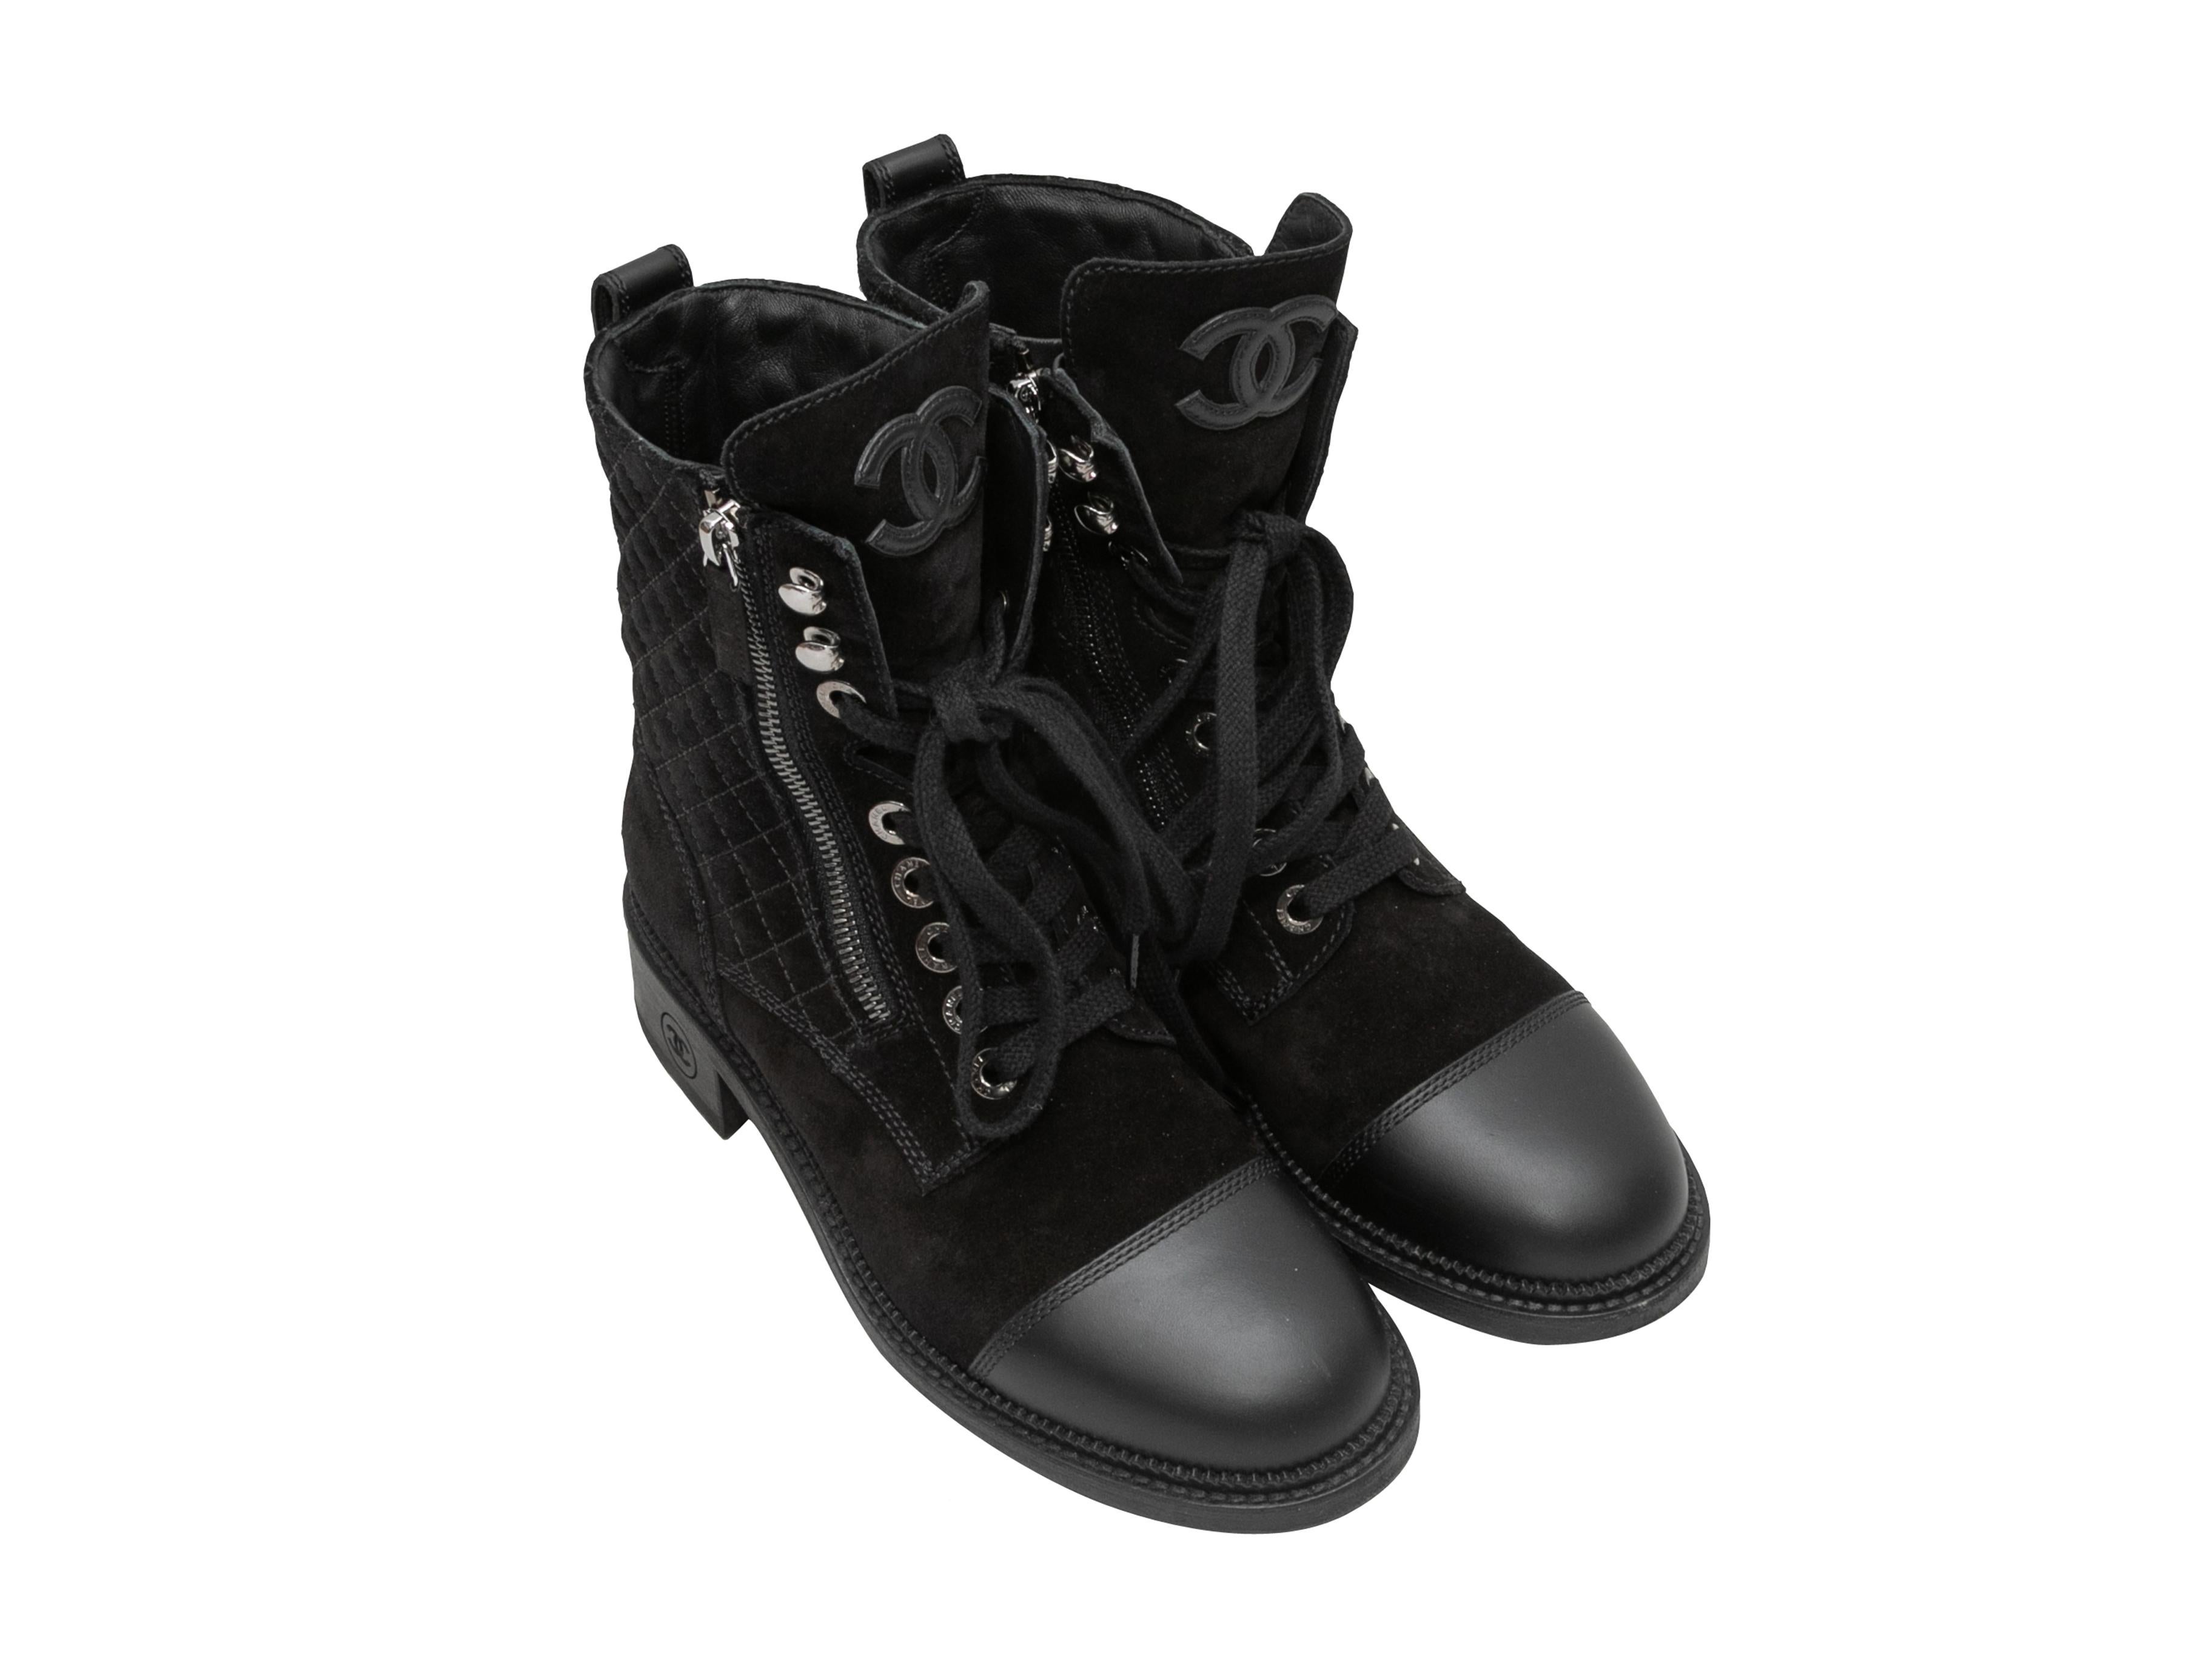 Black suede and leather quilted combat boots by Chanel. Cap-toe. Lace-up detailing at tops. Lug soles. Zip closures at tops. 6